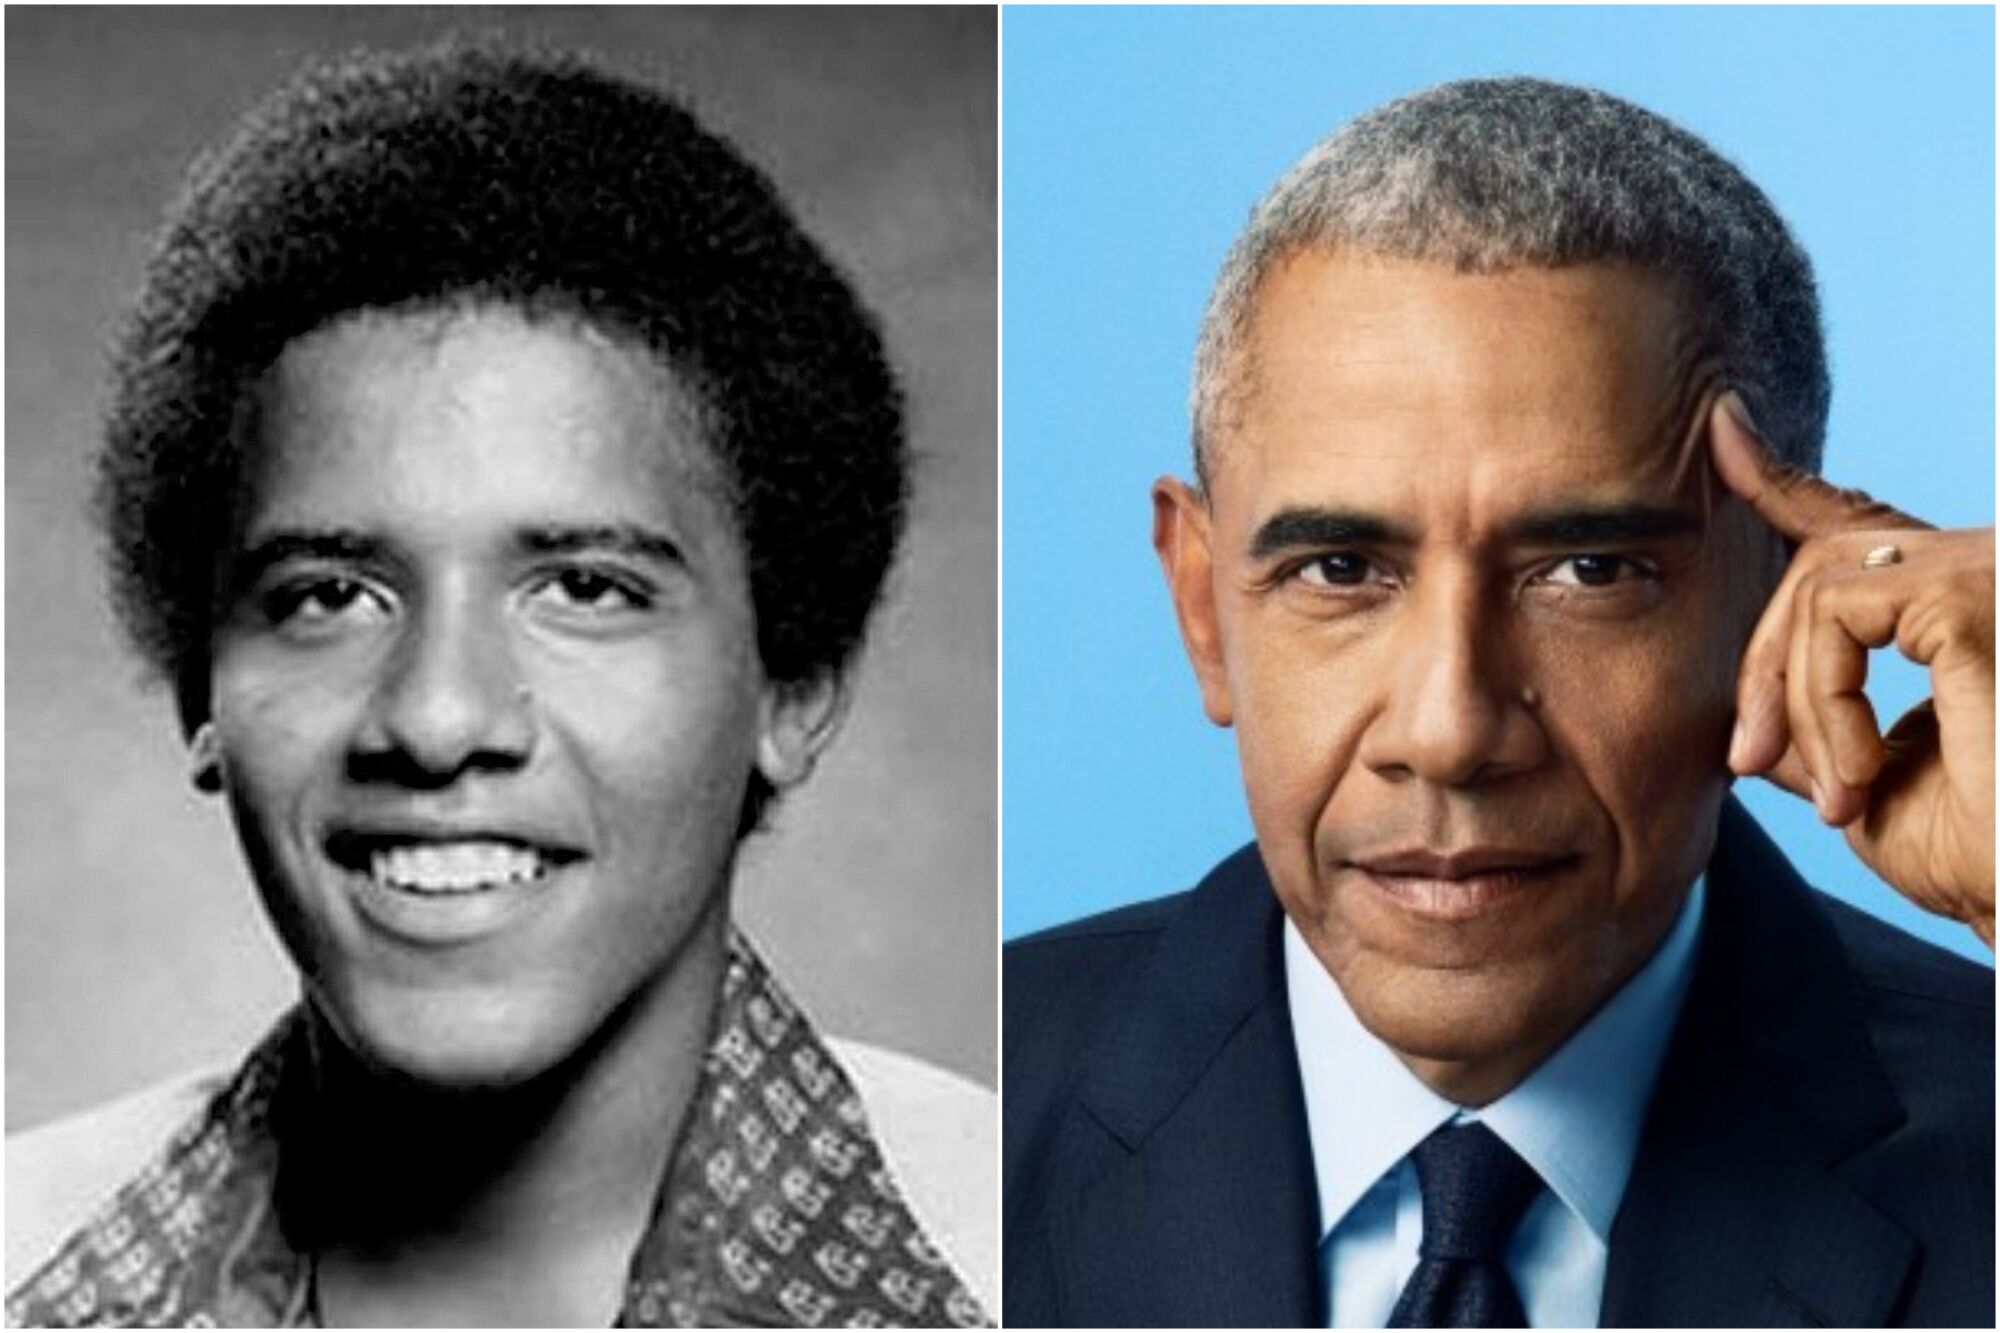 Barack Obama as an arriving Occidental College freshman and as he looks today